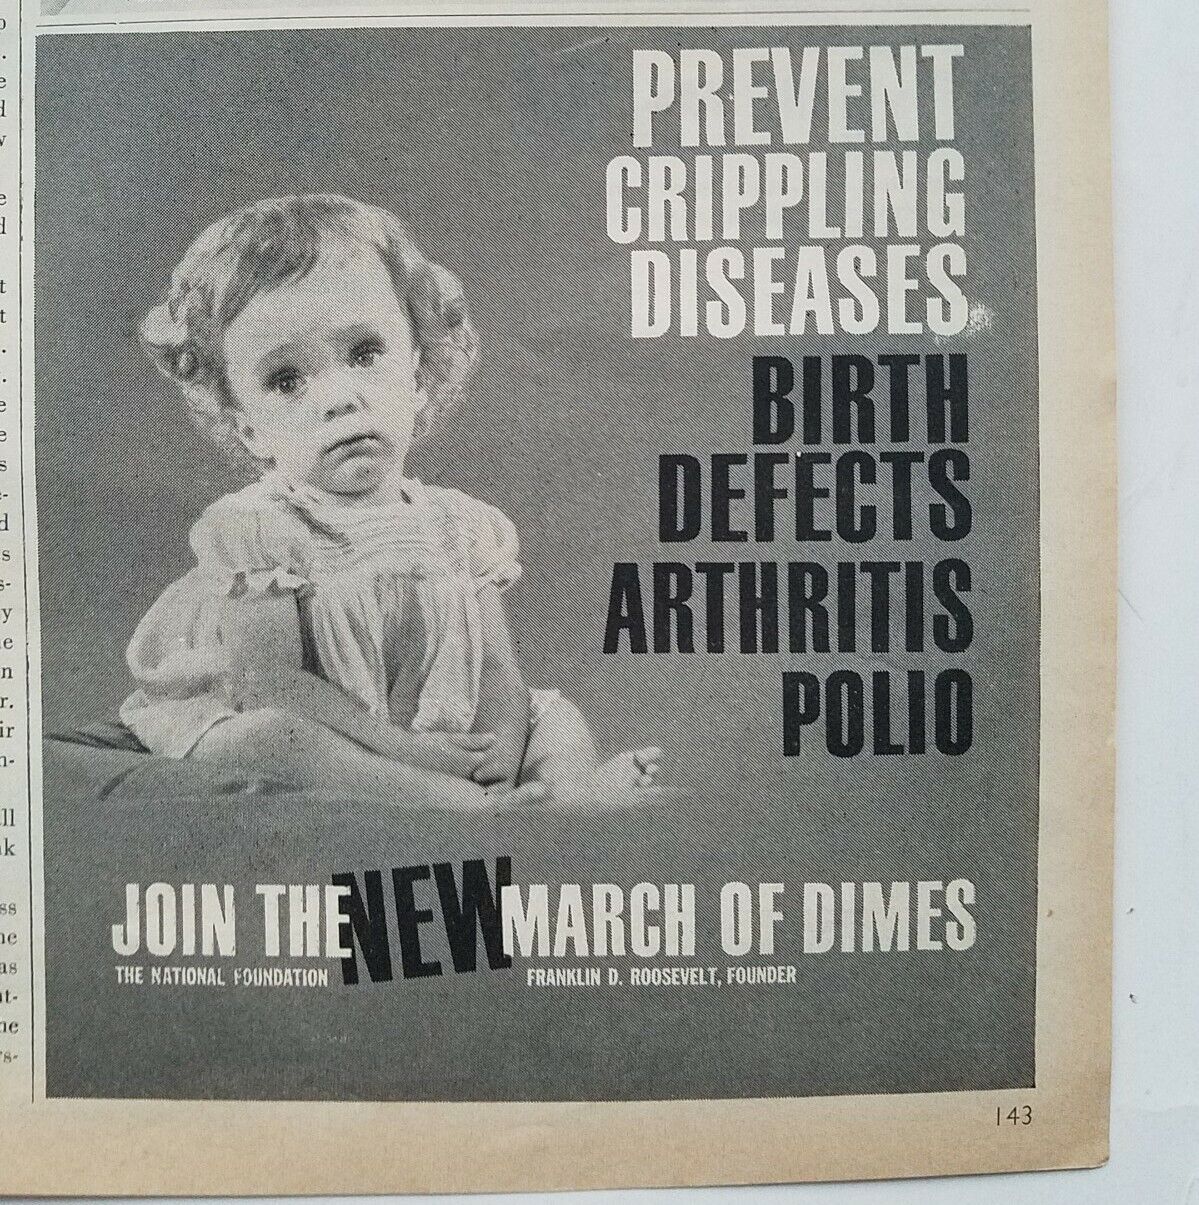 1960 March of Dimes prevent crippling birth defects arthritis polio vintage ad